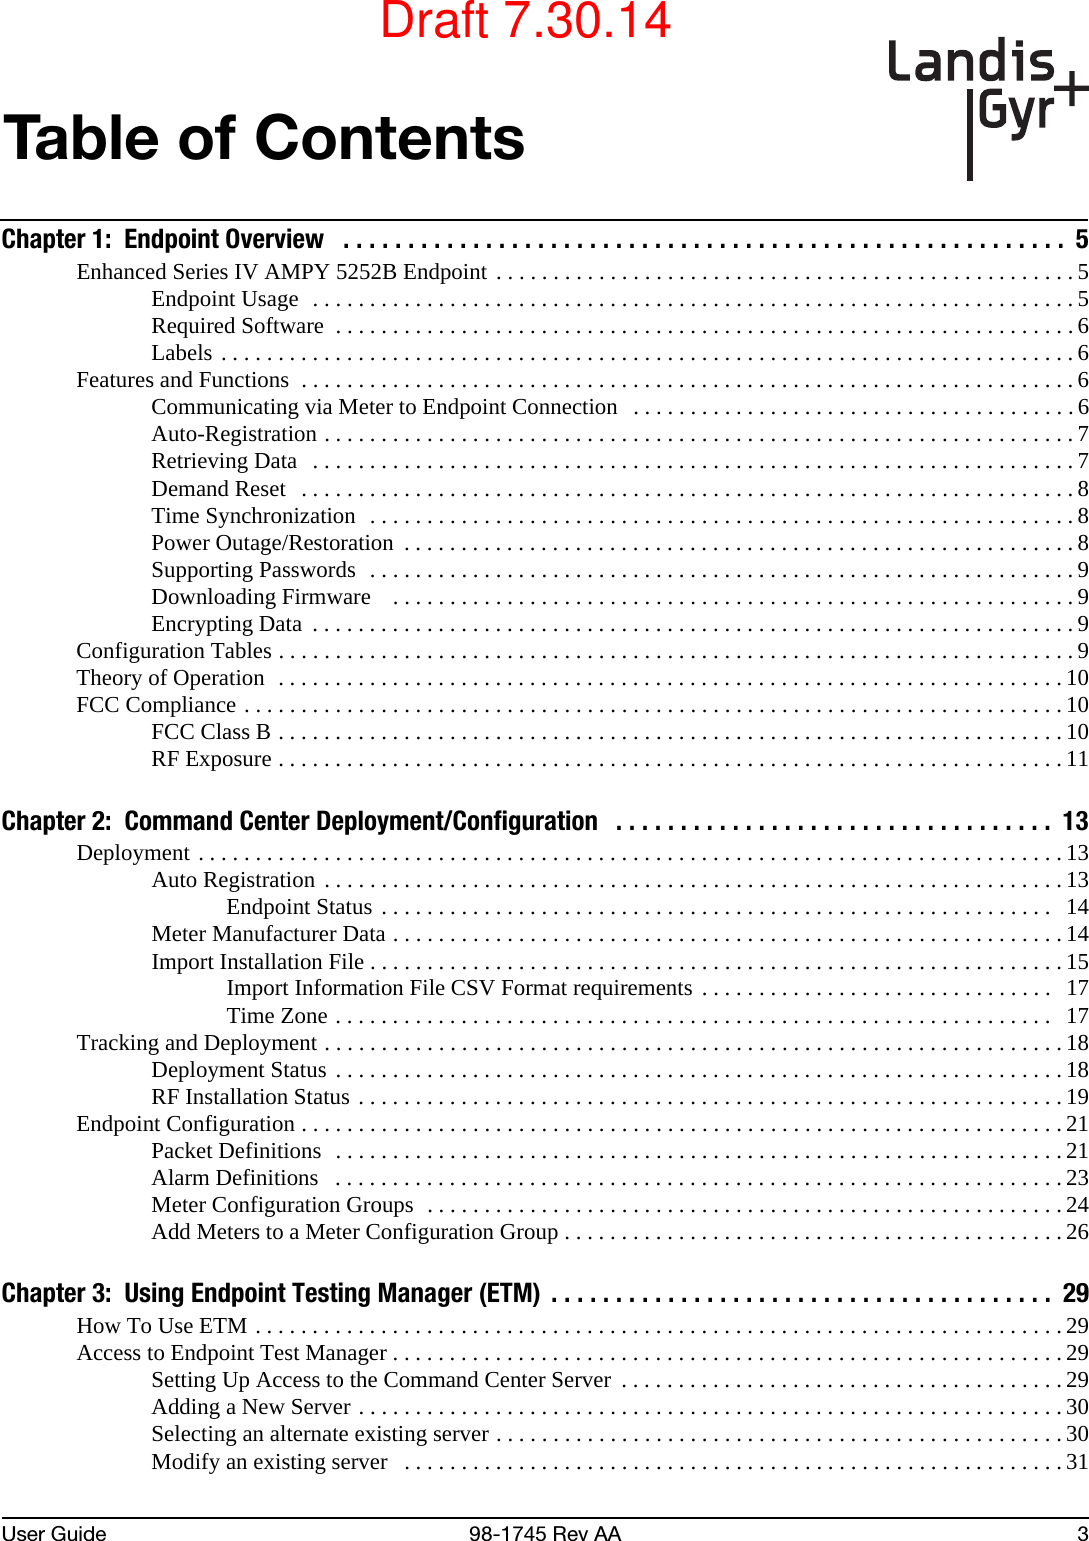 User Guide 98-1745 Rev AA 3Table of ContentsChapter 1:  Endpoint Overview   . . . . . . . . . . . . . . . . . . . . . . . . . . . . . . . . . . . . . . . . . . . . . . . . . . . . . . . .  5Enhanced Series IV AMPY 5252B Endpoint . . . . . . . . . . . . . . . . . . . . . . . . . . . . . . . . . . . . . . . . . . . . . . . . . . . 5Endpoint Usage  . . . . . . . . . . . . . . . . . . . . . . . . . . . . . . . . . . . . . . . . . . . . . . . . . . . . . . . . . . . . . . . . . . .5Required Software  . . . . . . . . . . . . . . . . . . . . . . . . . . . . . . . . . . . . . . . . . . . . . . . . . . . . . . . . . . . . . . . . . 6Labels . . . . . . . . . . . . . . . . . . . . . . . . . . . . . . . . . . . . . . . . . . . . . . . . . . . . . . . . . . . . . . . . . . . . . . . . . . . 6Features and Functions  . . . . . . . . . . . . . . . . . . . . . . . . . . . . . . . . . . . . . . . . . . . . . . . . . . . . . . . . . . . . . . . . . . . . 6Communicating via Meter to Endpoint Connection  . . . . . . . . . . . . . . . . . . . . . . . . . . . . . . . . . . . . . . . 6Auto-Registration . . . . . . . . . . . . . . . . . . . . . . . . . . . . . . . . . . . . . . . . . . . . . . . . . . . . . . . . . . . . . . . . . . 7Retrieving Data   . . . . . . . . . . . . . . . . . . . . . . . . . . . . . . . . . . . . . . . . . . . . . . . . . . . . . . . . . . . . . . . . . . . 7Demand Reset   . . . . . . . . . . . . . . . . . . . . . . . . . . . . . . . . . . . . . . . . . . . . . . . . . . . . . . . . . . . . . . . . . . . . 8Time Synchronization  . . . . . . . . . . . . . . . . . . . . . . . . . . . . . . . . . . . . . . . . . . . . . . . . . . . . . . . . . . . . . . 8Power Outage/Restoration  . . . . . . . . . . . . . . . . . . . . . . . . . . . . . . . . . . . . . . . . . . . . . . . . . . . . . . . . . . . 8Supporting Passwords  . . . . . . . . . . . . . . . . . . . . . . . . . . . . . . . . . . . . . . . . . . . . . . . . . . . . . . . . . . . . . . 9Downloading Firmware    . . . . . . . . . . . . . . . . . . . . . . . . . . . . . . . . . . . . . . . . . . . . . . . . . . . . . . . . . . . . 9Encrypting Data  . . . . . . . . . . . . . . . . . . . . . . . . . . . . . . . . . . . . . . . . . . . . . . . . . . . . . . . . . . . . . . . . . . . 9Configuration Tables . . . . . . . . . . . . . . . . . . . . . . . . . . . . . . . . . . . . . . . . . . . . . . . . . . . . . . . . . . . . . . . . . . . . . . 9Theory of Operation  . . . . . . . . . . . . . . . . . . . . . . . . . . . . . . . . . . . . . . . . . . . . . . . . . . . . . . . . . . . . . . . . . . . . .10FCC Compliance . . . . . . . . . . . . . . . . . . . . . . . . . . . . . . . . . . . . . . . . . . . . . . . . . . . . . . . . . . . . . . . . . . . . . . . . 10FCC Class B . . . . . . . . . . . . . . . . . . . . . . . . . . . . . . . . . . . . . . . . . . . . . . . . . . . . . . . . . . . . . . . . . . . . .10RF Exposure . . . . . . . . . . . . . . . . . . . . . . . . . . . . . . . . . . . . . . . . . . . . . . . . . . . . . . . . . . . . . . . . . . . . . 11Chapter 2:  Command Center Deployment/Configuration   . . . . . . . . . . . . . . . . . . . . . . . . . . . . . . . . . .  13Deployment . . . . . . . . . . . . . . . . . . . . . . . . . . . . . . . . . . . . . . . . . . . . . . . . . . . . . . . . . . . . . . . . . . . . . . . . . . . . 13Auto Registration . . . . . . . . . . . . . . . . . . . . . . . . . . . . . . . . . . . . . . . . . . . . . . . . . . . . . . . . . . . . . . . . . 13Endpoint Status . . . . . . . . . . . . . . . . . . . . . . . . . . . . . . . . . . . . . . . . . . . . . . . . . . . . . . . . . . .  14Meter Manufacturer Data . . . . . . . . . . . . . . . . . . . . . . . . . . . . . . . . . . . . . . . . . . . . . . . . . . . . . . . . . . . 14Import Installation File . . . . . . . . . . . . . . . . . . . . . . . . . . . . . . . . . . . . . . . . . . . . . . . . . . . . . . . . . . . . . 15Import Information File CSV Format requirements . . . . . . . . . . . . . . . . . . . . . . . . . . . . . . .  17Time Zone . . . . . . . . . . . . . . . . . . . . . . . . . . . . . . . . . . . . . . . . . . . . . . . . . . . . . . . . . . . . . . .   17Tracking and Deployment . . . . . . . . . . . . . . . . . . . . . . . . . . . . . . . . . . . . . . . . . . . . . . . . . . . . . . . . . . . . . . . . . 18Deployment Status . . . . . . . . . . . . . . . . . . . . . . . . . . . . . . . . . . . . . . . . . . . . . . . . . . . . . . . . . . . . . . . . 18RF Installation Status . . . . . . . . . . . . . . . . . . . . . . . . . . . . . . . . . . . . . . . . . . . . . . . . . . . . . . . . . . . . . .19Endpoint Configuration . . . . . . . . . . . . . . . . . . . . . . . . . . . . . . . . . . . . . . . . . . . . . . . . . . . . . . . . . . . . . . . . . . . 21Packet Definitions  . . . . . . . . . . . . . . . . . . . . . . . . . . . . . . . . . . . . . . . . . . . . . . . . . . . . . . . . . . . . . . . . 21Alarm Definitions   . . . . . . . . . . . . . . . . . . . . . . . . . . . . . . . . . . . . . . . . . . . . . . . . . . . . . . . . . . . . . . . . 23Meter Configuration Groups  . . . . . . . . . . . . . . . . . . . . . . . . . . . . . . . . . . . . . . . . . . . . . . . . . . . . . . . . 24Add Meters to a Meter Configuration Group . . . . . . . . . . . . . . . . . . . . . . . . . . . . . . . . . . . . . . . . . . . .26Chapter 3:  Using Endpoint Testing Manager (ETM)  . . . . . . . . . . . . . . . . . . . . . . . . . . . . . . . . . . . . . . .  29How To Use ETM . . . . . . . . . . . . . . . . . . . . . . . . . . . . . . . . . . . . . . . . . . . . . . . . . . . . . . . . . . . . . . . . . . . . . . .29Access to Endpoint Test Manager . . . . . . . . . . . . . . . . . . . . . . . . . . . . . . . . . . . . . . . . . . . . . . . . . . . . . . . . . . . 29Setting Up Access to the Command Center Server  . . . . . . . . . . . . . . . . . . . . . . . . . . . . . . . . . . . . . . . 29Adding a New Server . . . . . . . . . . . . . . . . . . . . . . . . . . . . . . . . . . . . . . . . . . . . . . . . . . . . . . . . . . . . . .30Selecting an alternate existing server . . . . . . . . . . . . . . . . . . . . . . . . . . . . . . . . . . . . . . . . . . . . . . . . . . 30Modify an existing server   . . . . . . . . . . . . . . . . . . . . . . . . . . . . . . . . . . . . . . . . . . . . . . . . . . . . . . . . . .31Draft 7.30.14